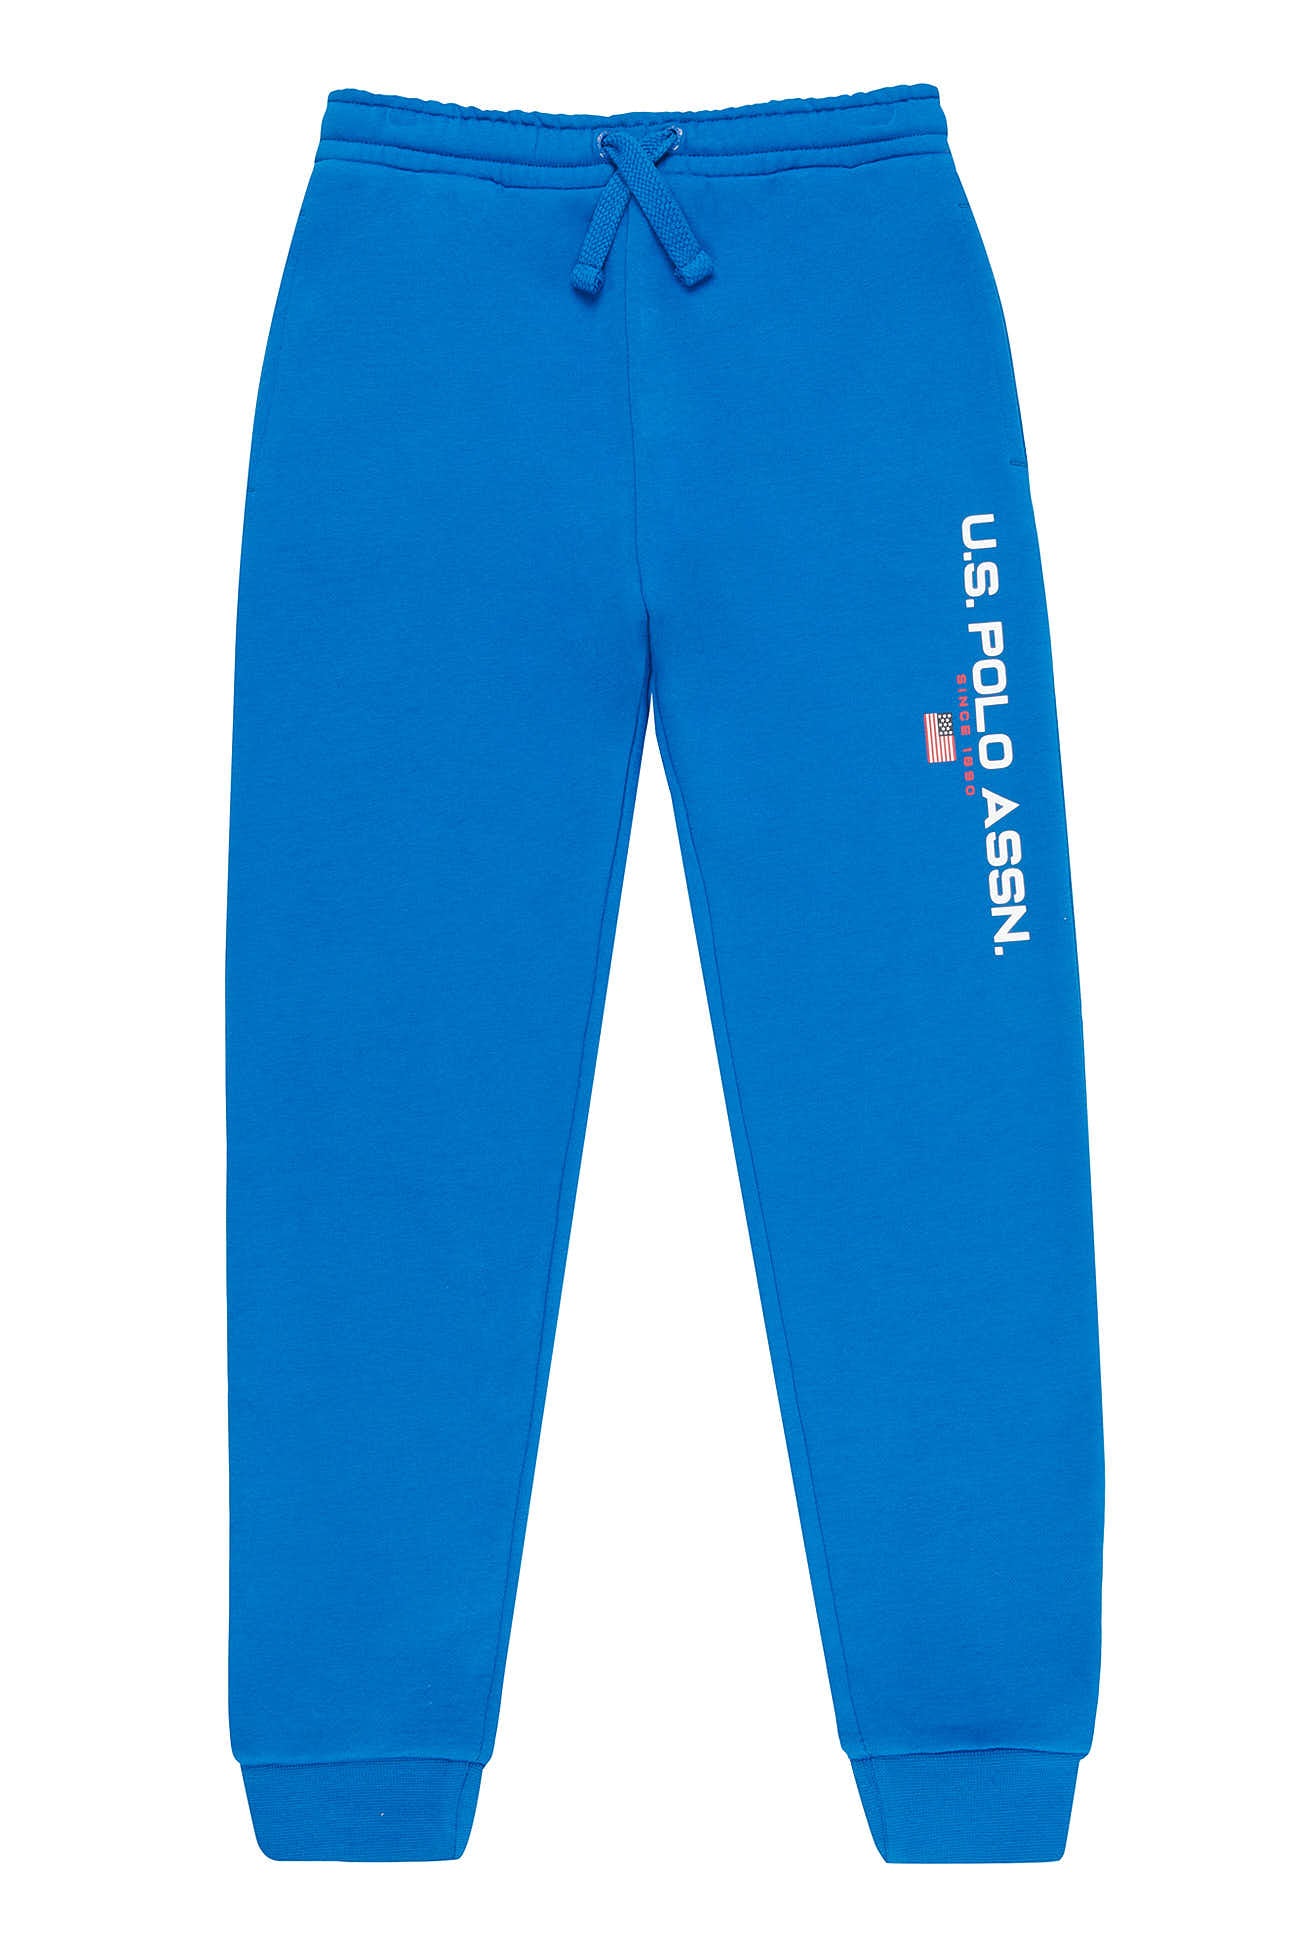 U.S. Polo Assn. Boys Block Flag Graphic Joggers in Classic Blue